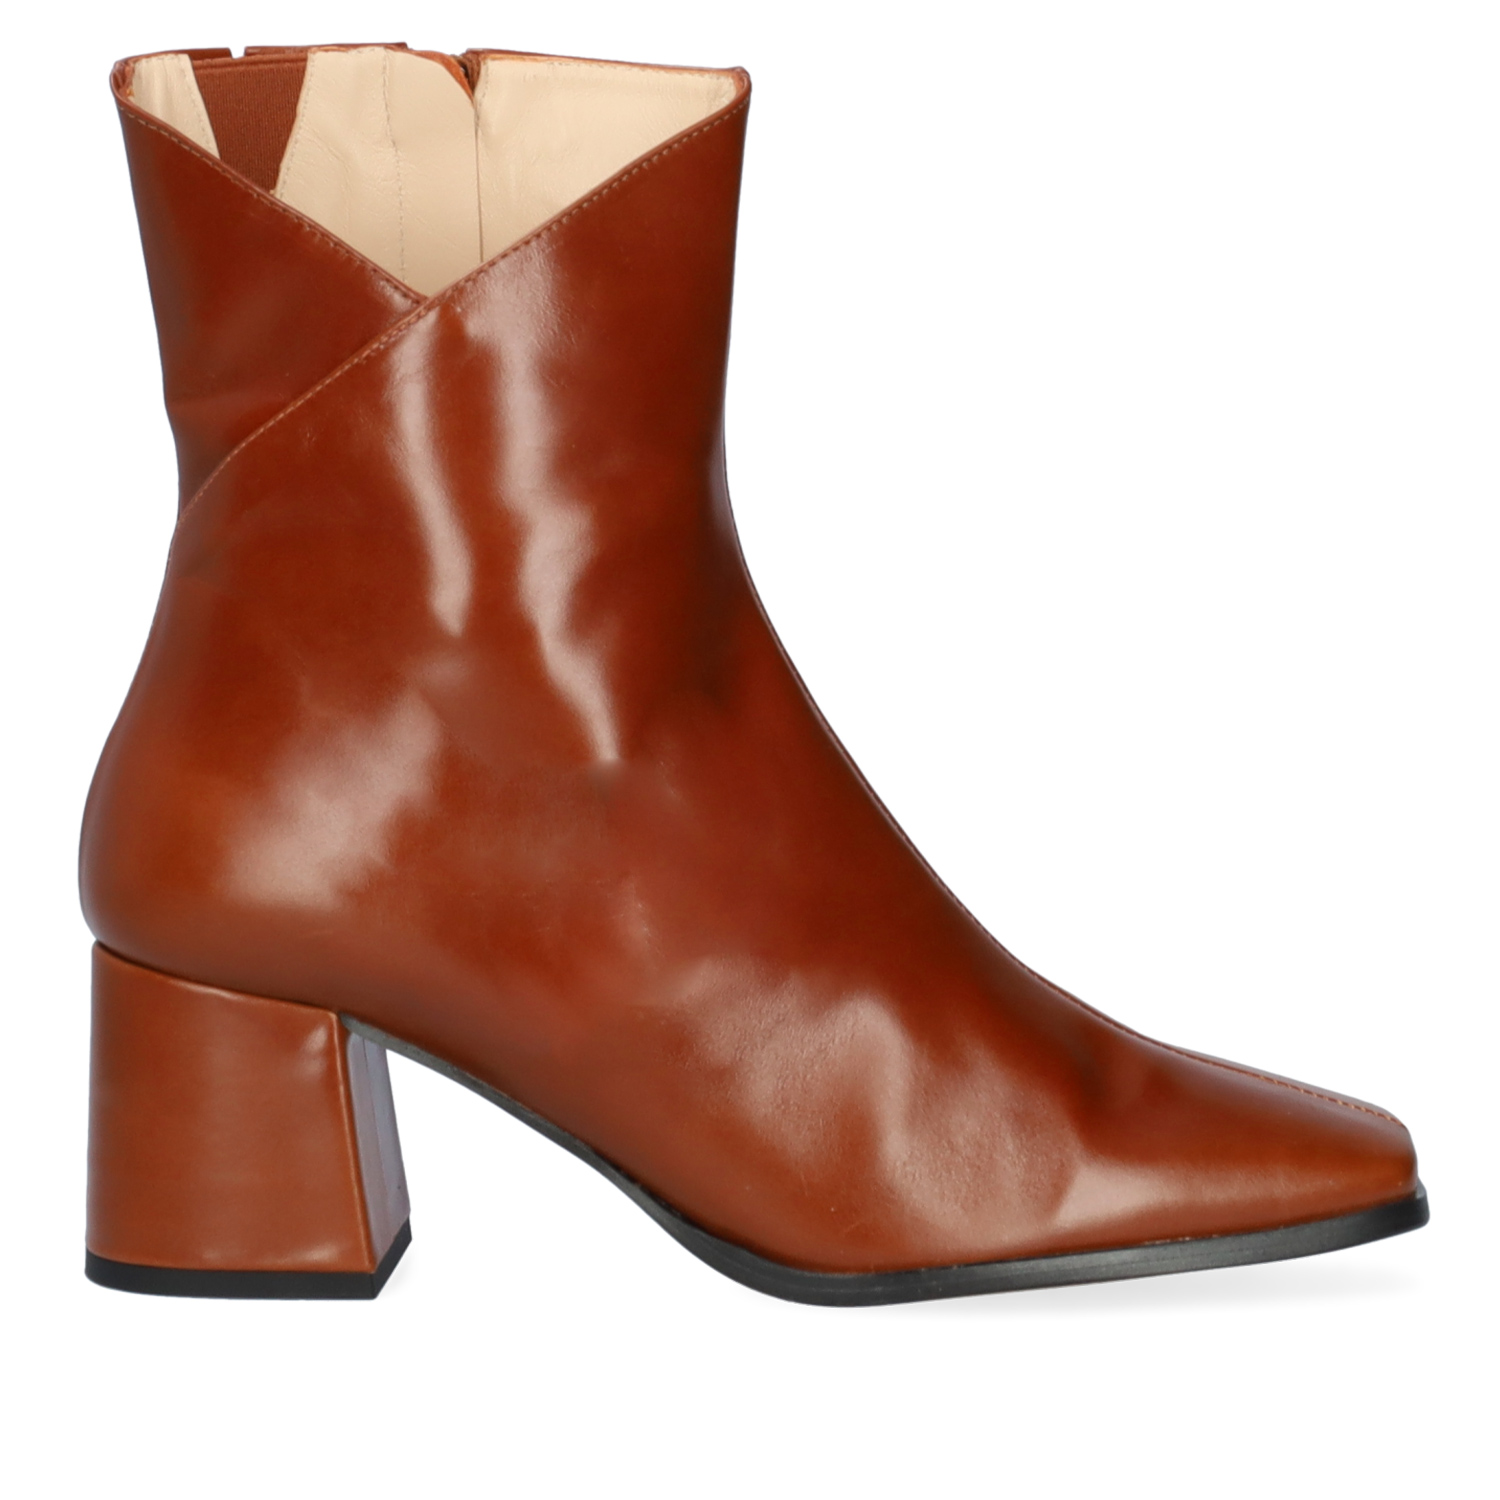 Heeled booties in brown leather